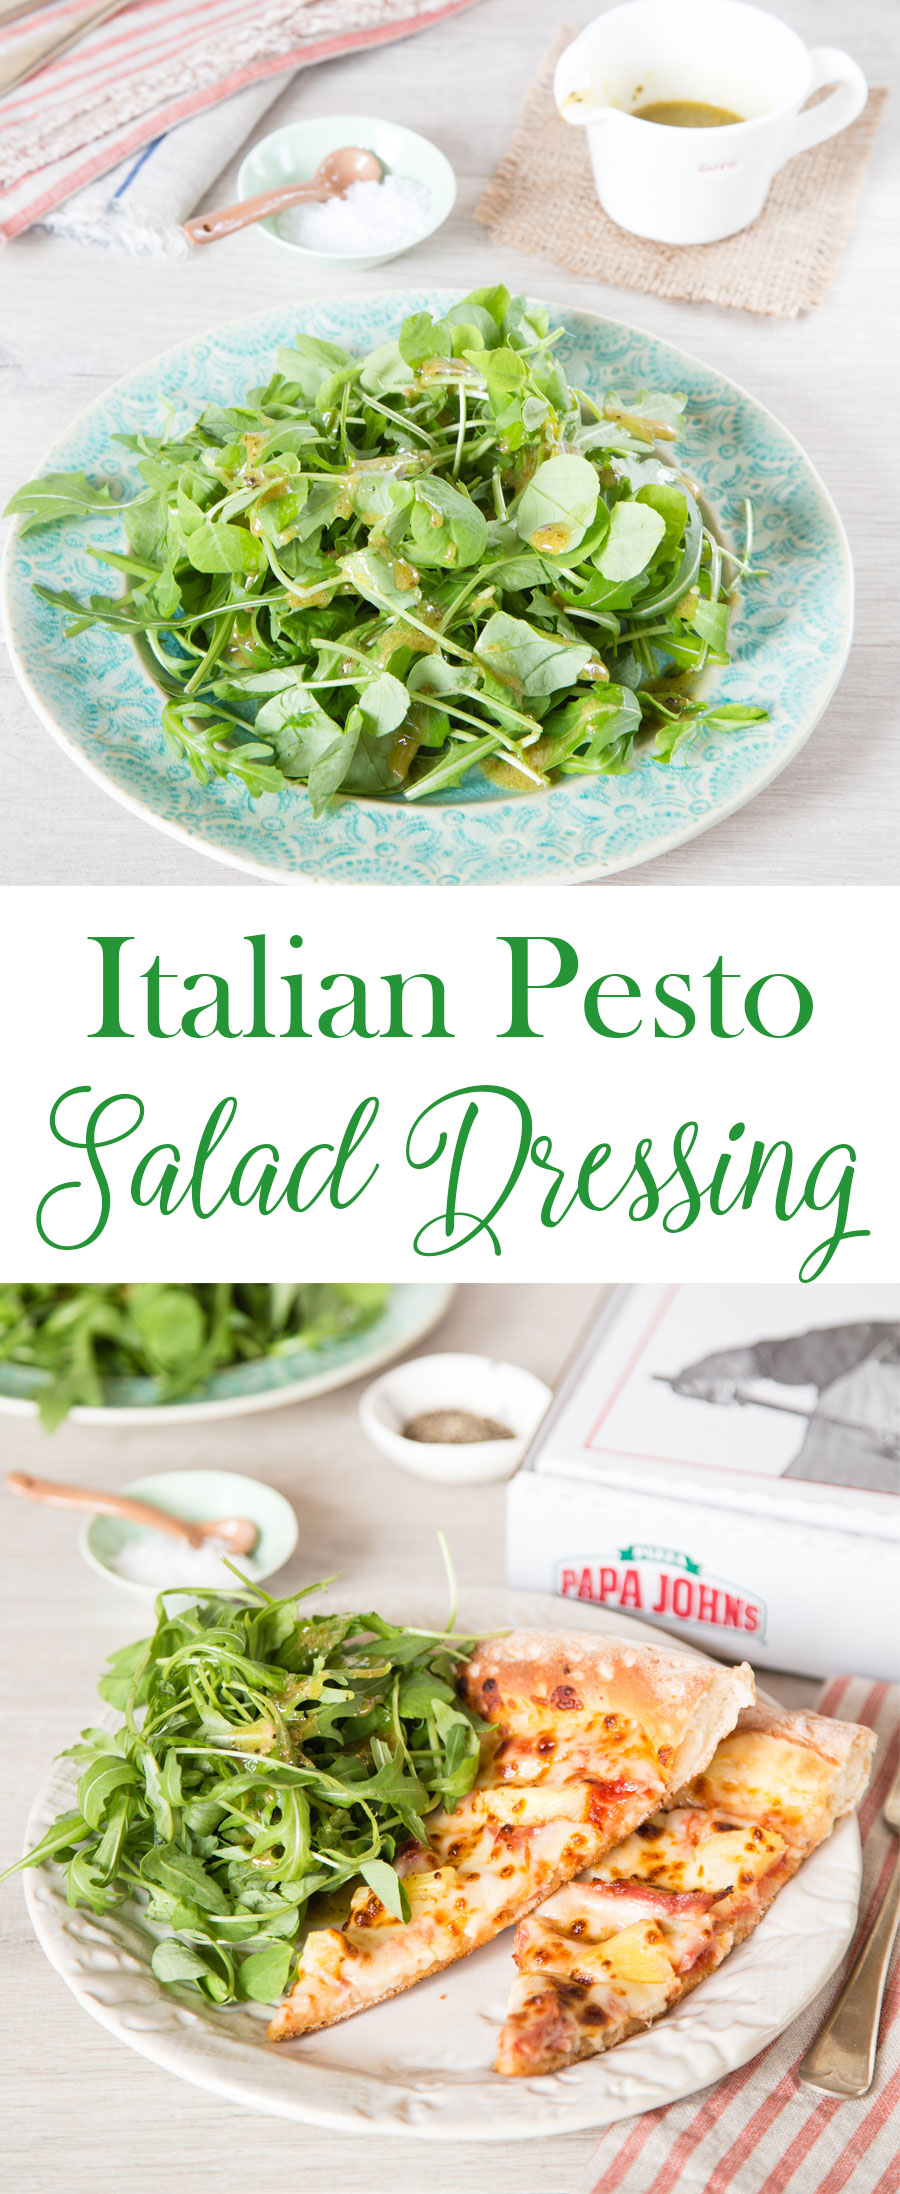 A simple pesto based salad dressing, which is perfect served with pizza.